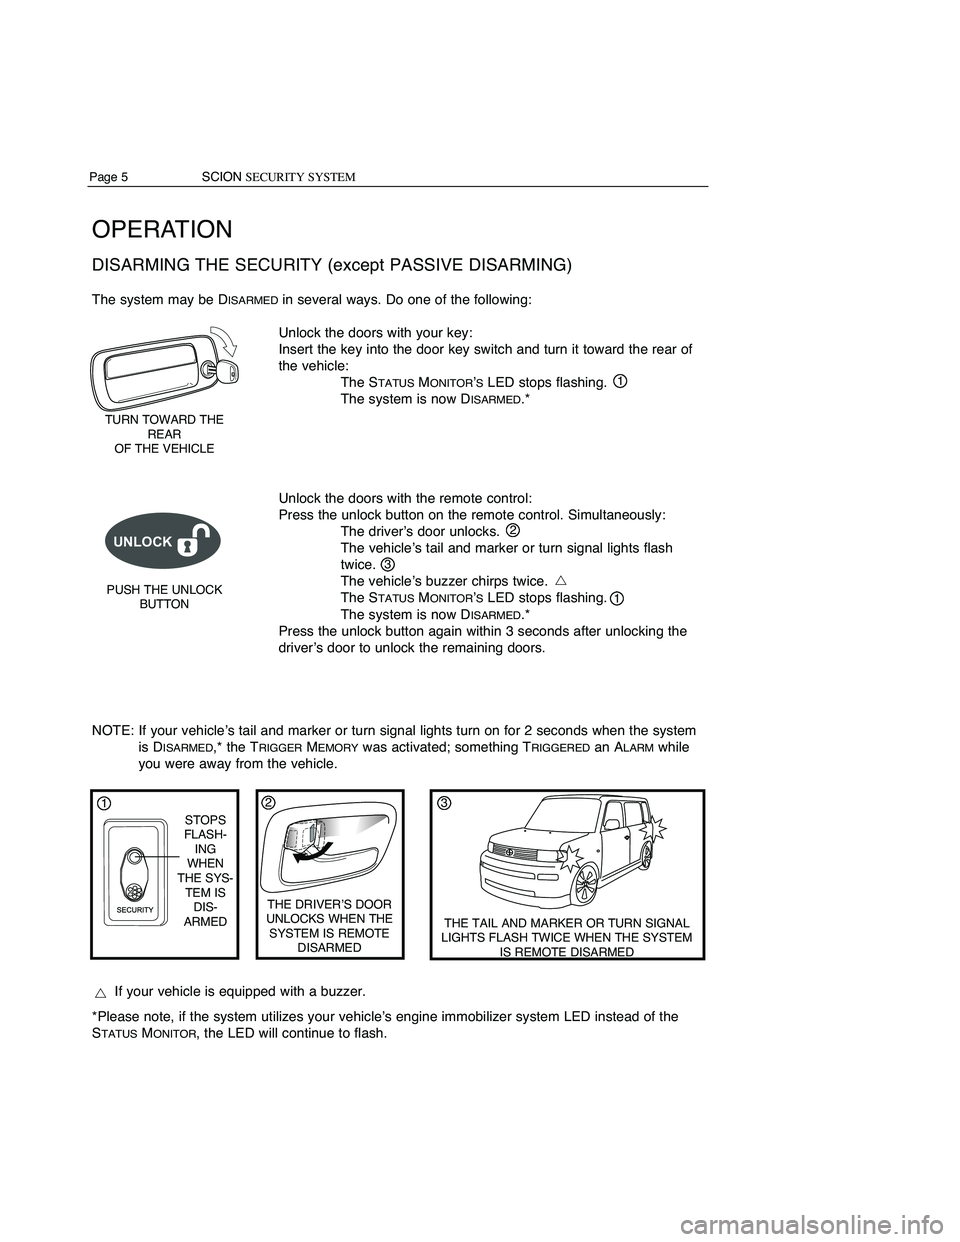 TOYOTA xB 2009  Accessories, Audio & Navigation (in English) SCIONSECURITYSYSTEM Page6
OPERA TION
PASSIVE (AUTOMATIC) ARMING&DISARM ING
WhentheScion Security isprogrammed toPASSIVELYARM,the system willARMafter theignition
key isremoved andalldoors areclosed; yo